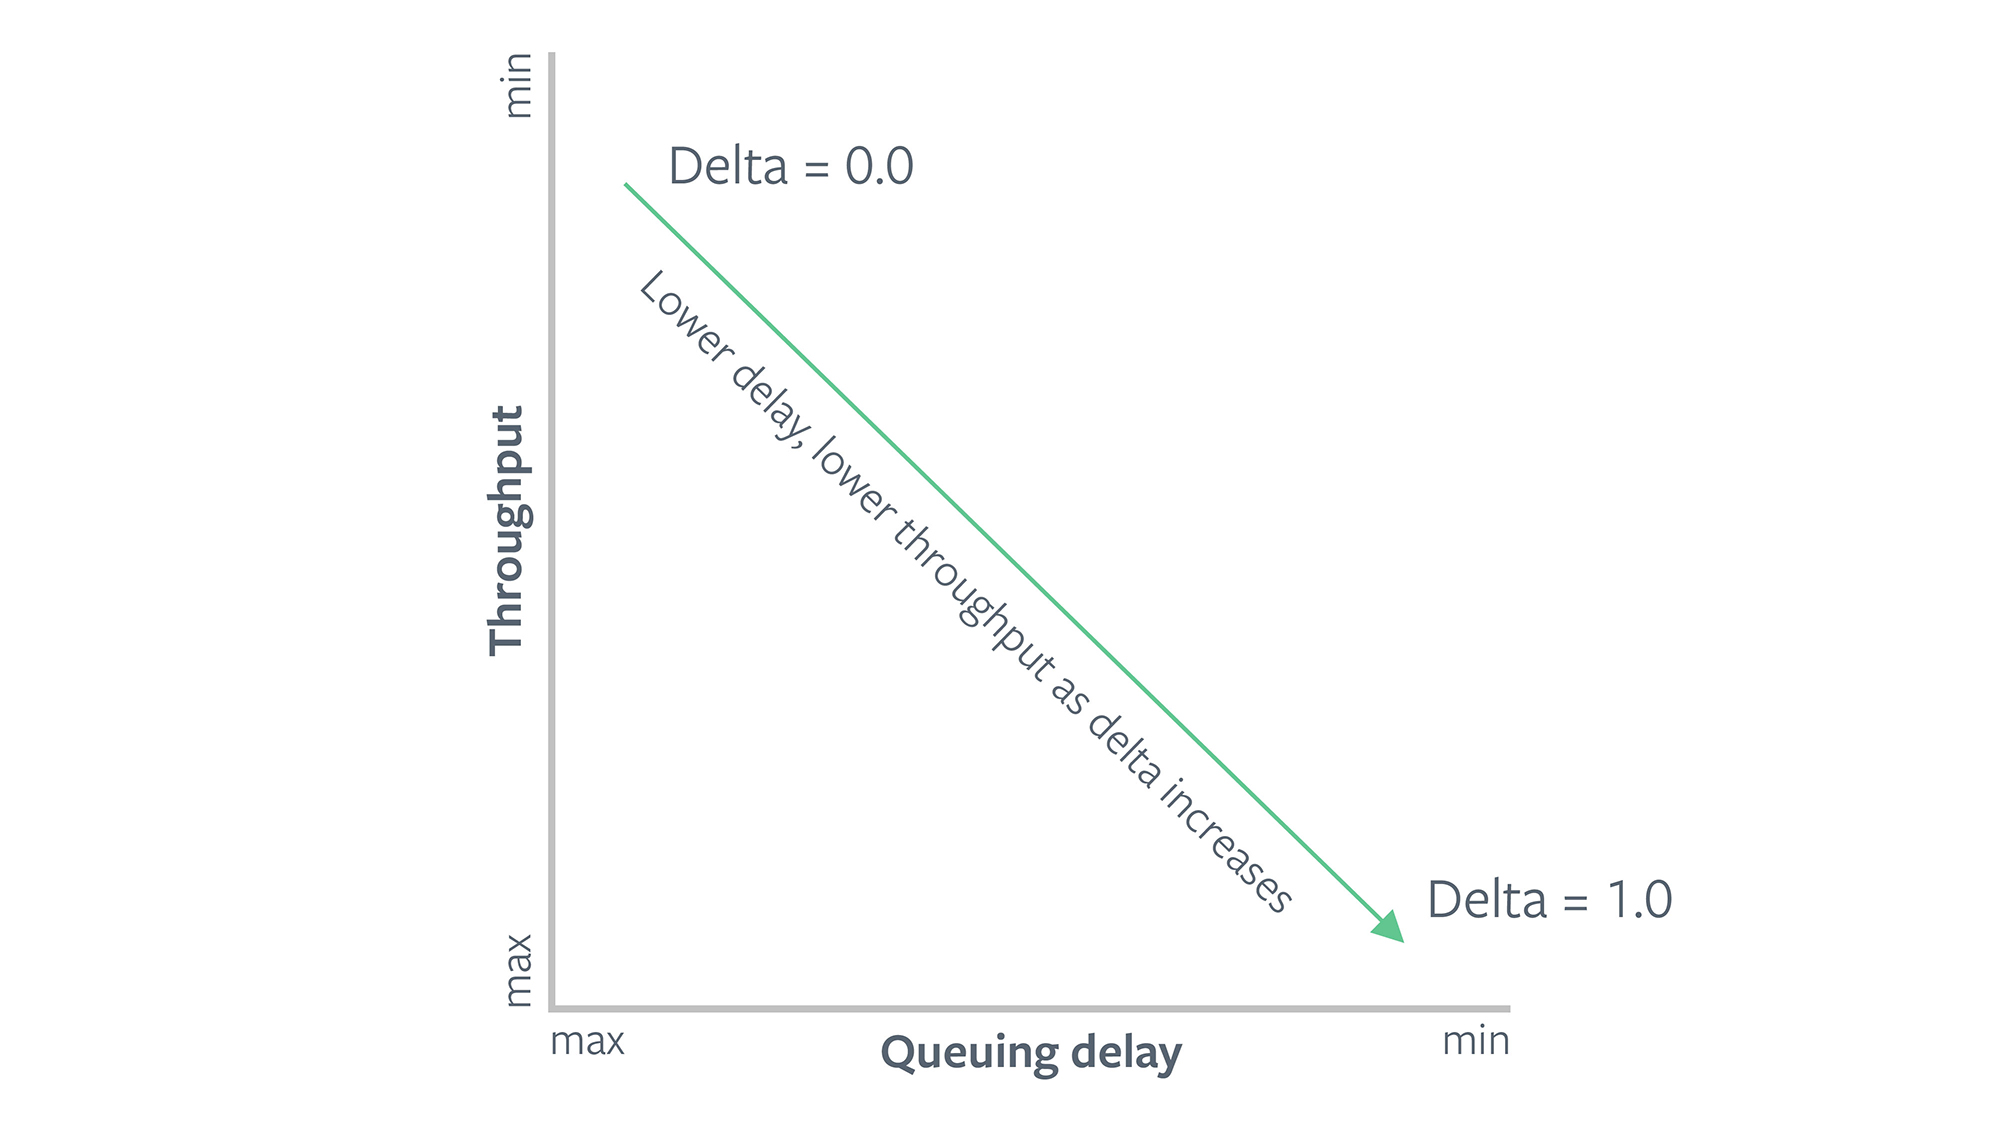  A higher value of delta makes COPA more sensitive to delays and provides lower throughput. A lower value of delta will provide more goodput at the cost of incurring more delays.